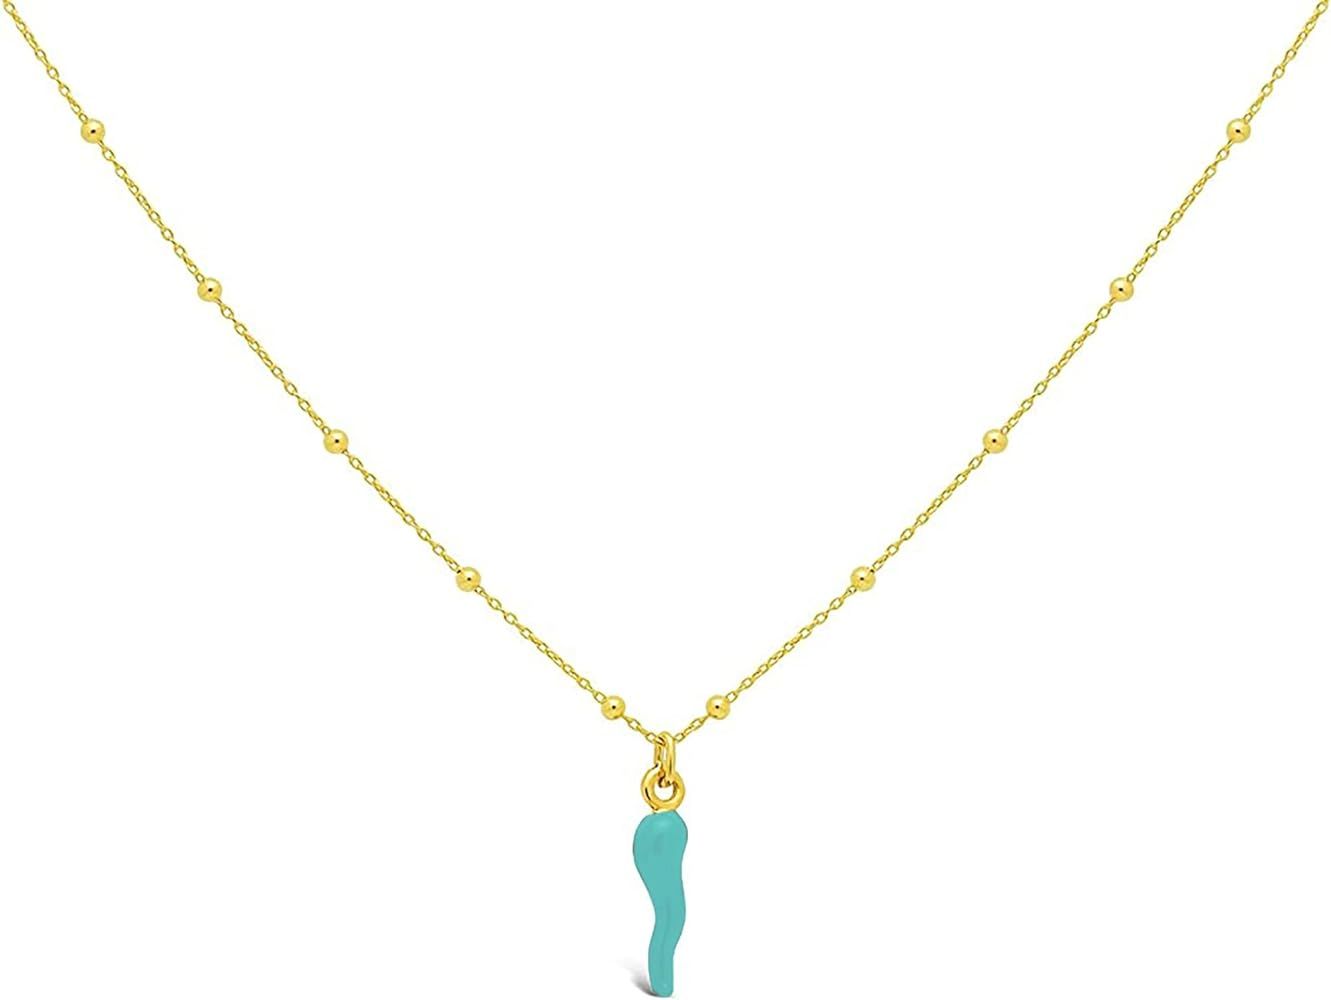 FRONAY Italian Red Horn Necklace - 14k Gold Plated Silver Cornicello Good Luck Pendant | Amazon (US)